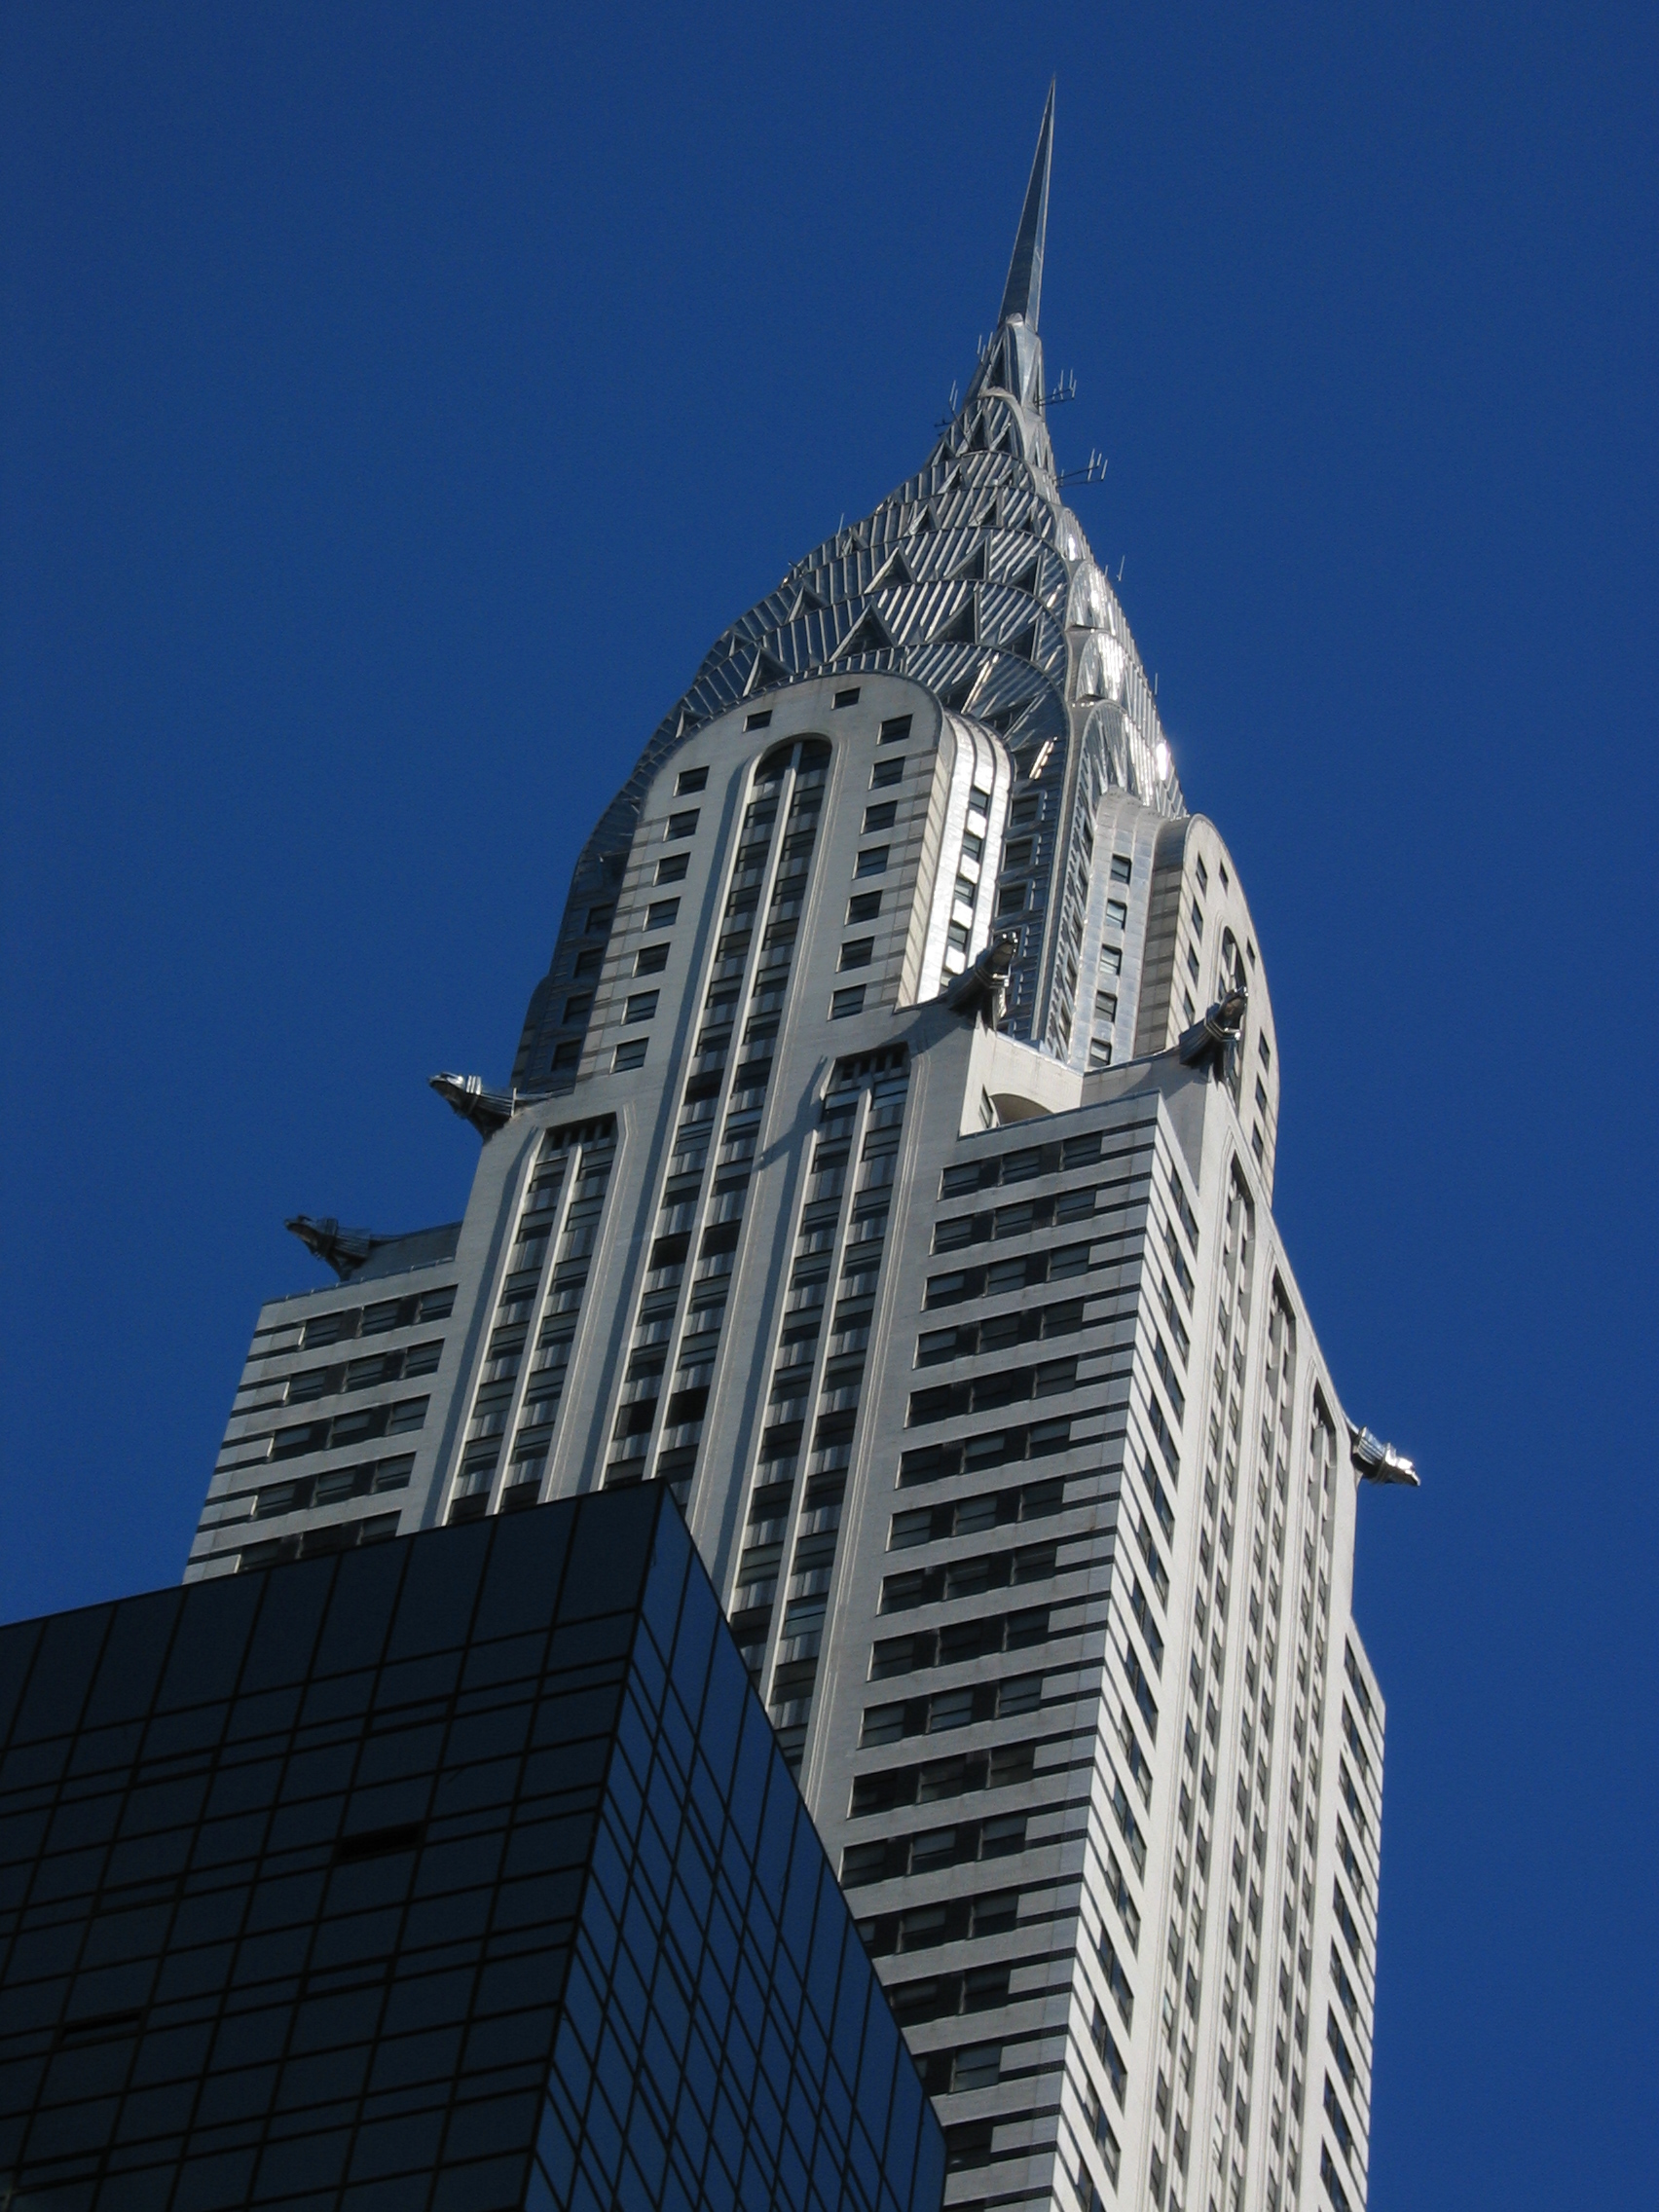 Chrysler Building in New York. Photo by <a href="http://www.flickr.com/photos/zoonabar/154354932/">zoonabar</a>